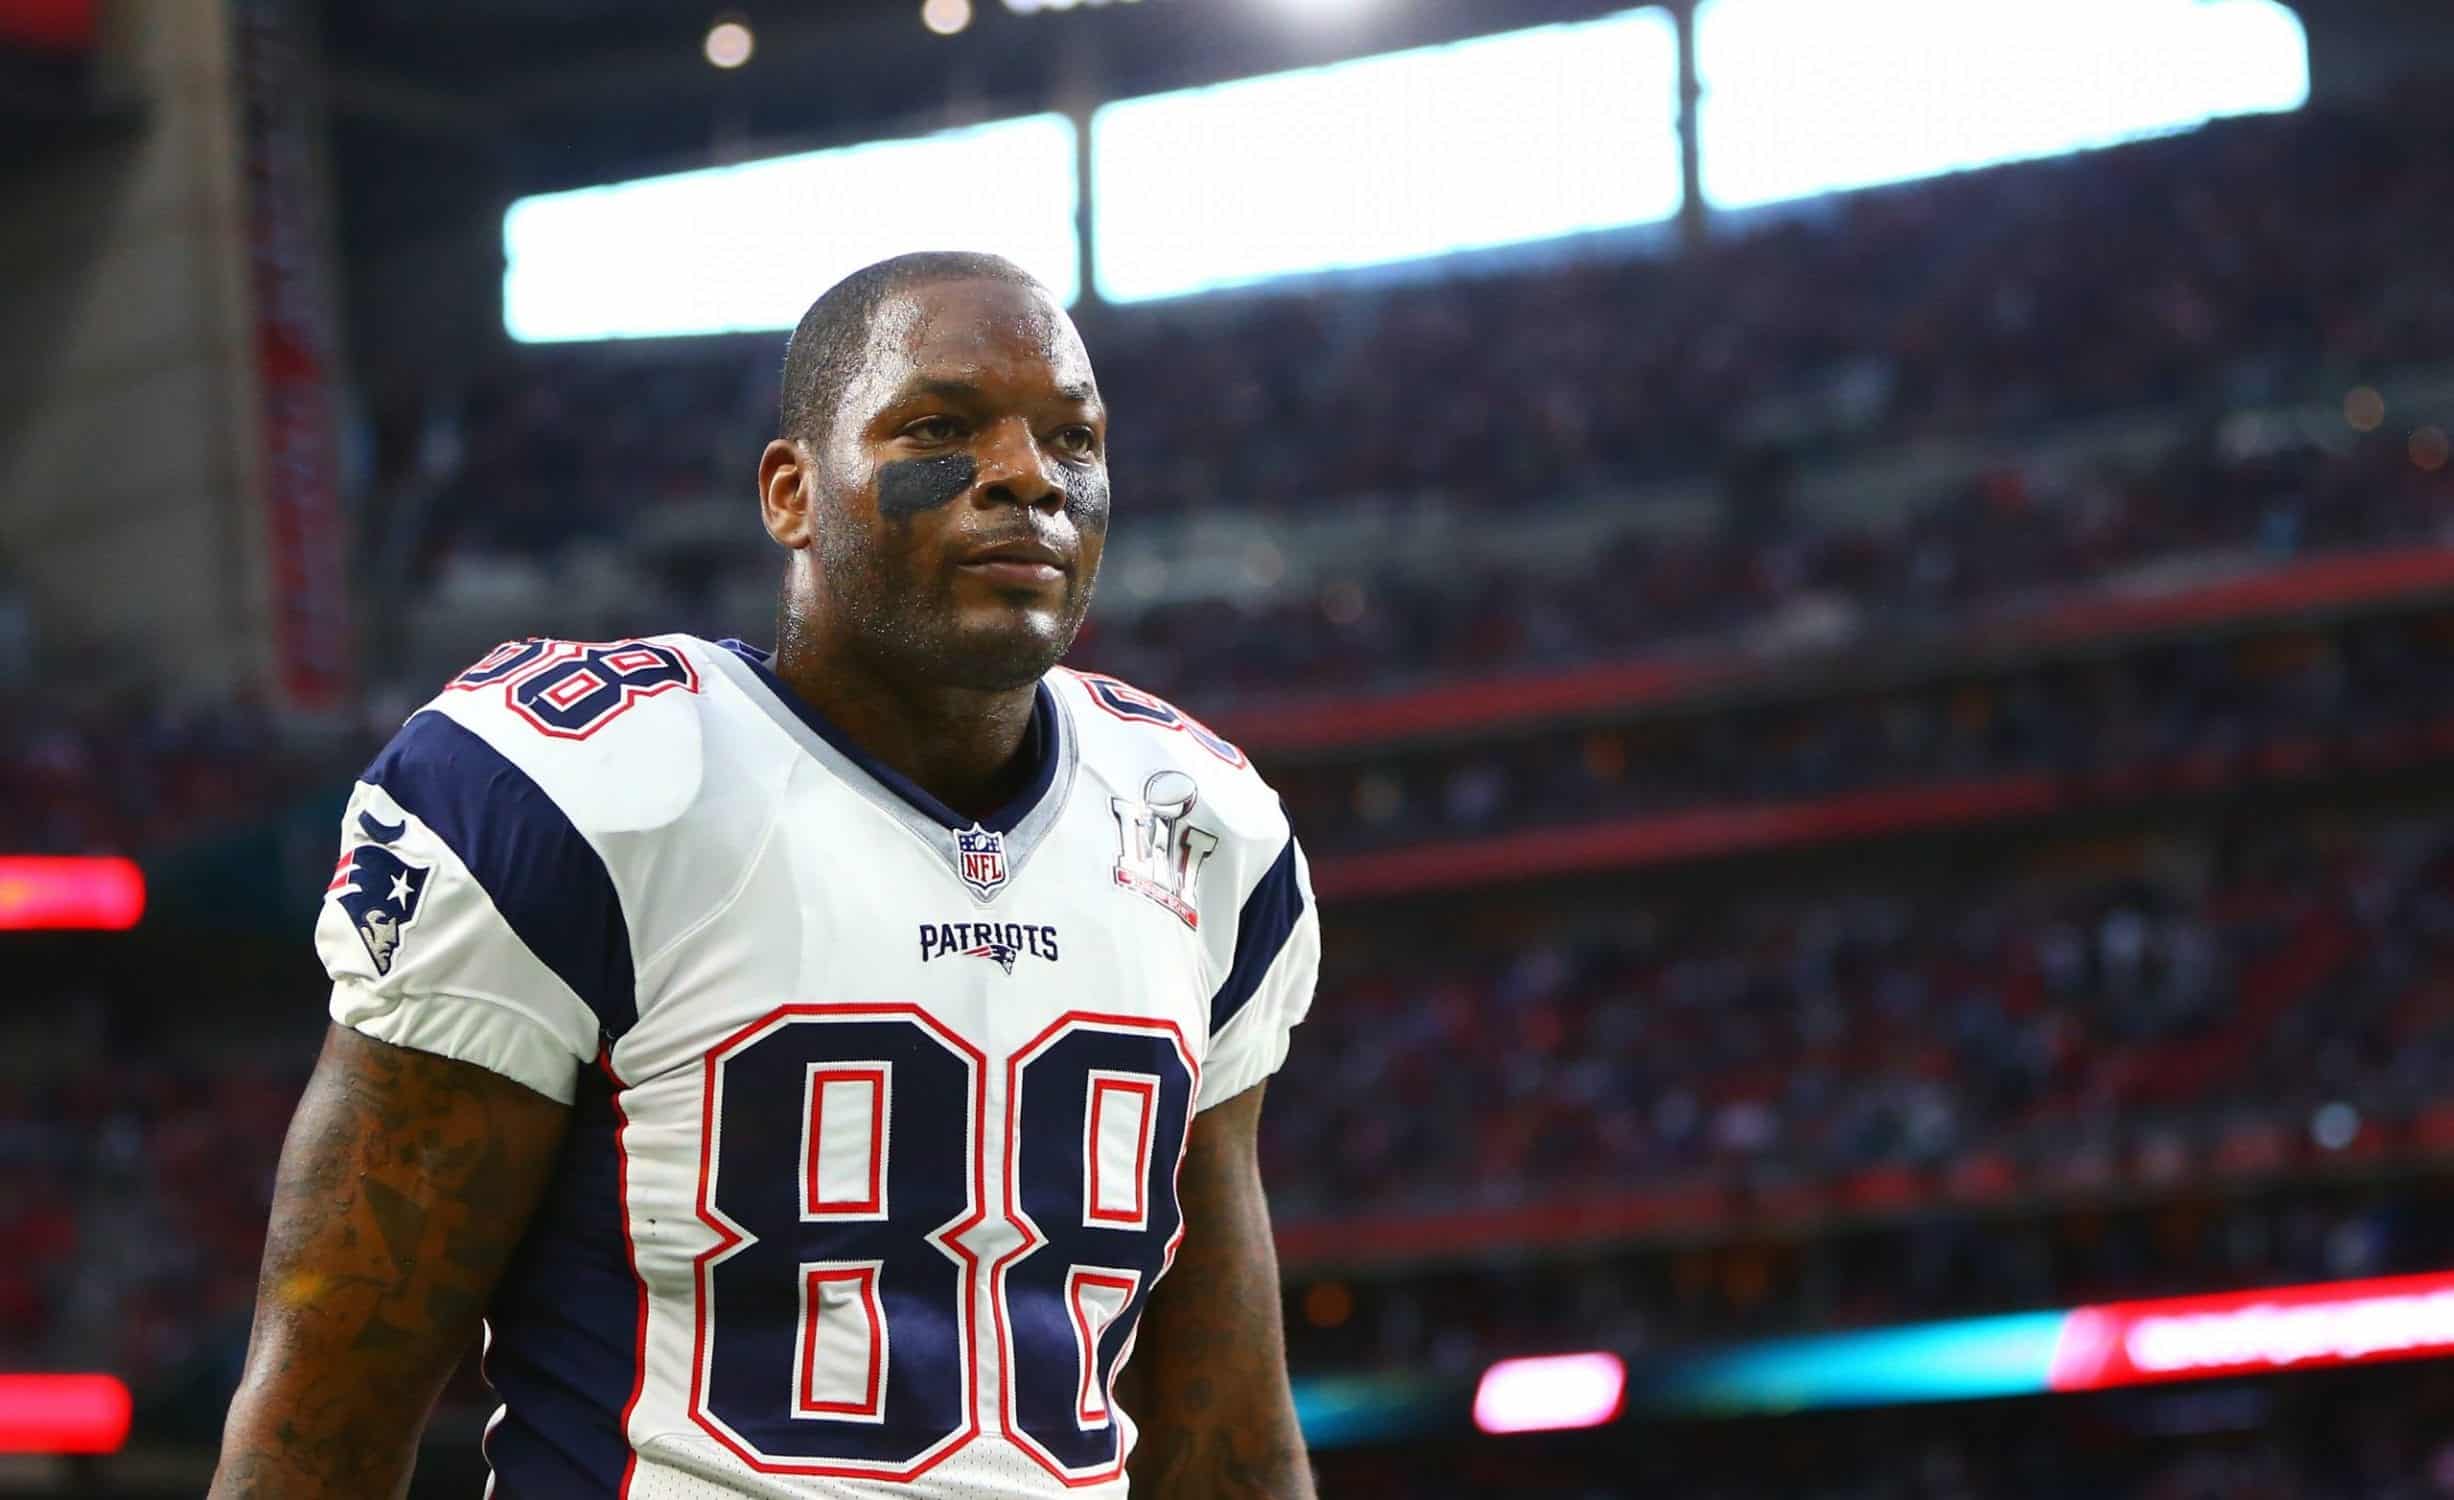 Could Martellus Bennett be headed to Seattle?